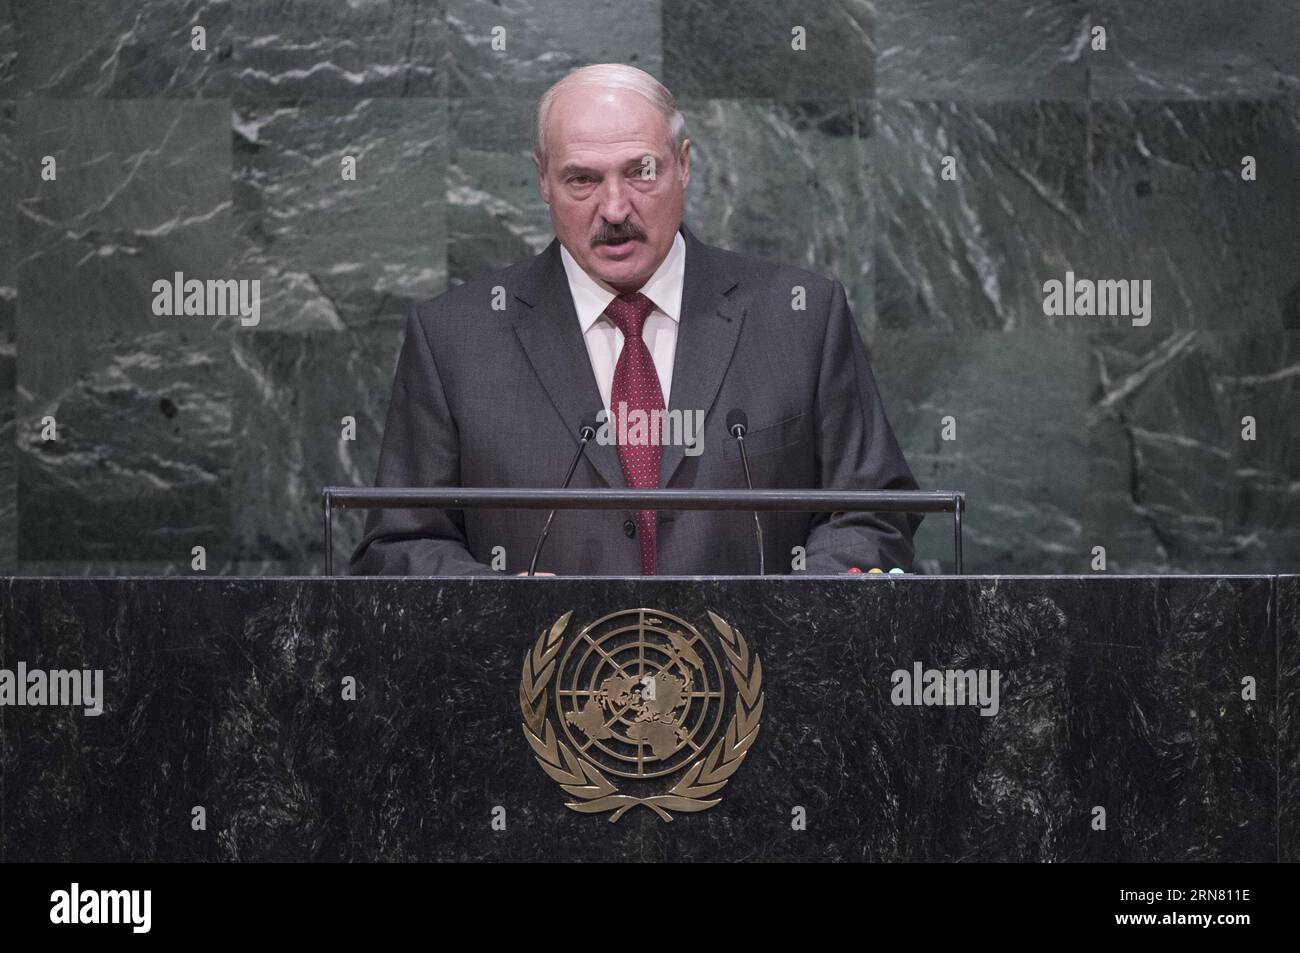 NEW YORK, Sept. 28, 2015 -- Belarusian President Alexander Lukashenko addresses the 70th session of the United Nations General Assembly at the UN headquarters in New York Sept. 28, 2015. The UN General Assembly general debate kicked off in New York on Monday.  UN-NEW YORK-GENERAL DEBATE Xinhua/UNxPhoto/AmandaxVoisard PUBLICATIONxNOTxINxCHN Stock Photo